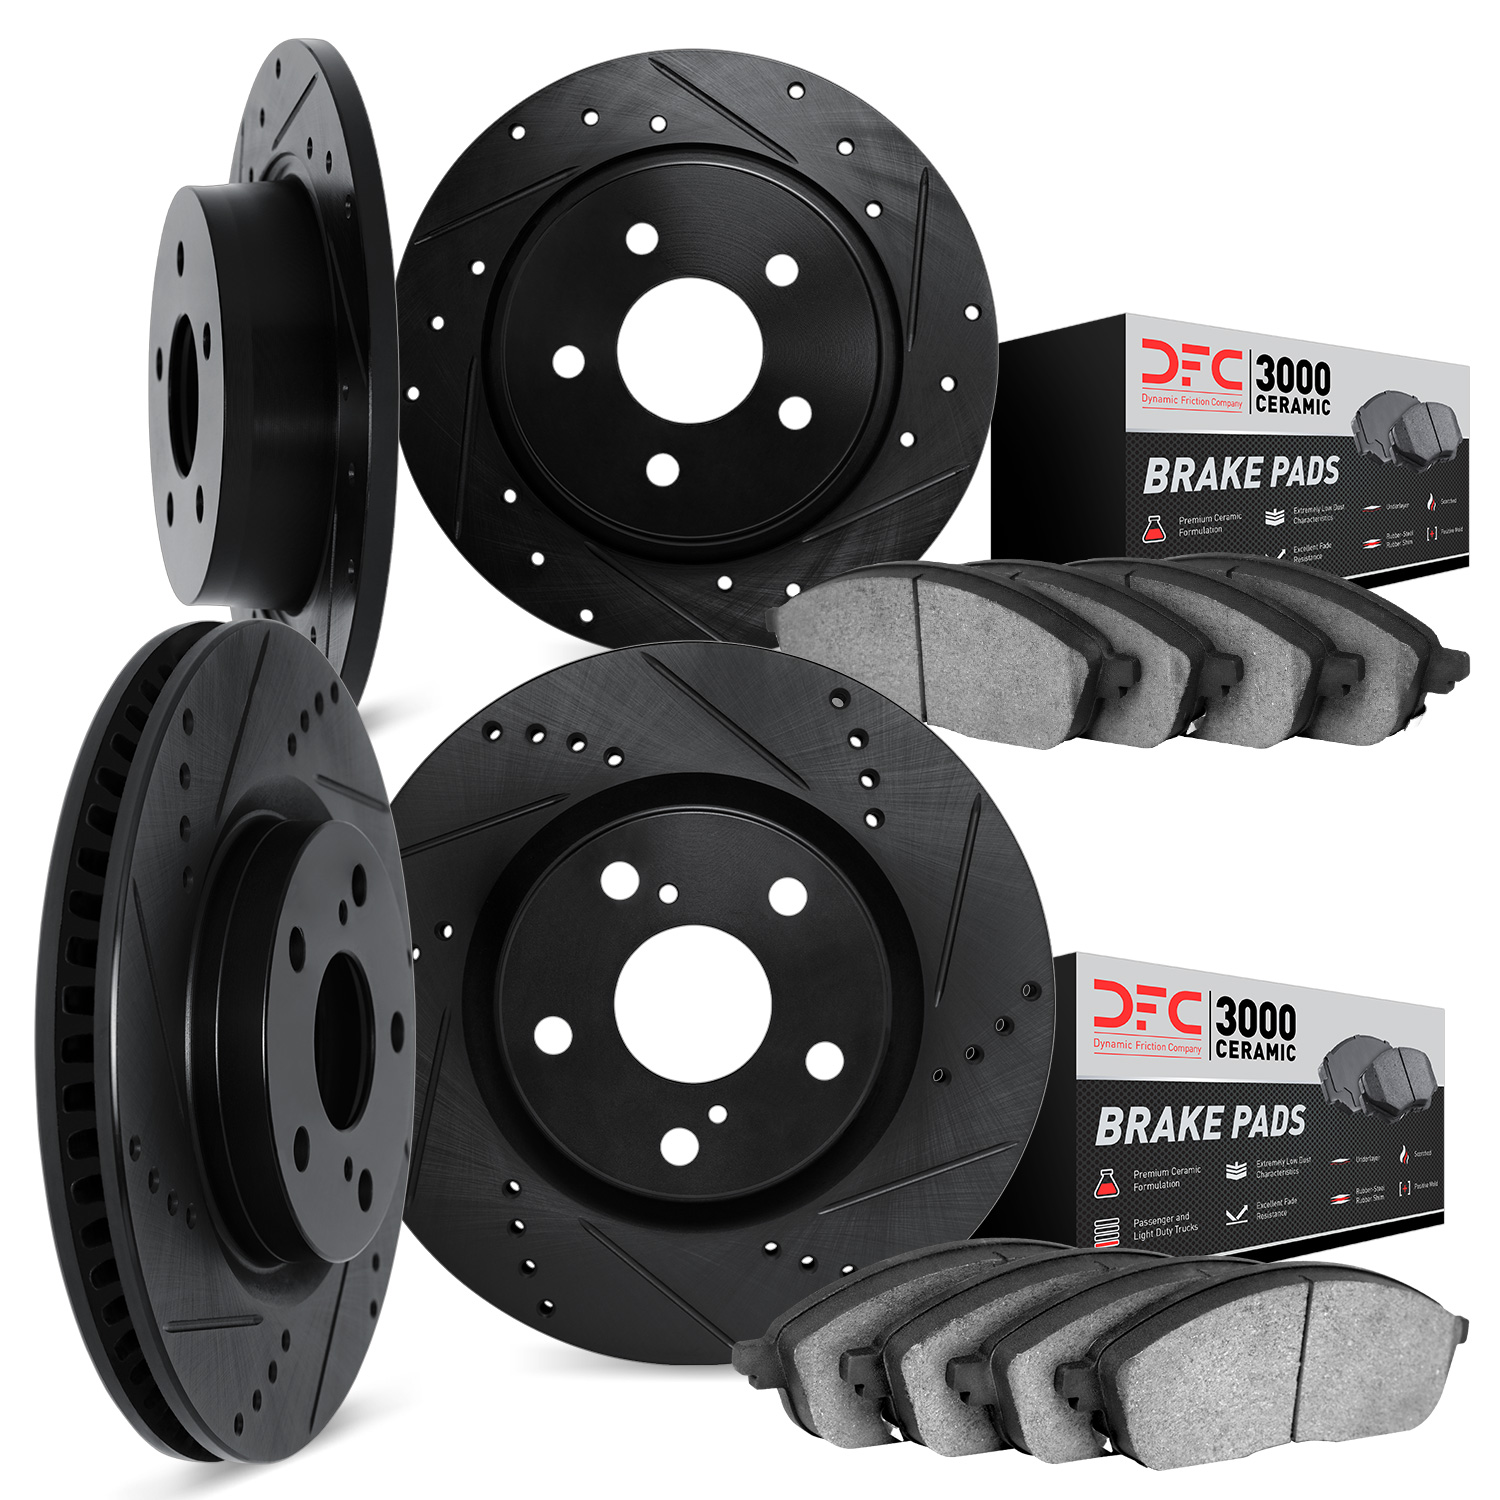 8304-45001 Drilled/Slotted Brake Rotors with 3000-Series Ceramic Brake Pads Kit [Black], 1984-1988 GM, Position: Front and Rear